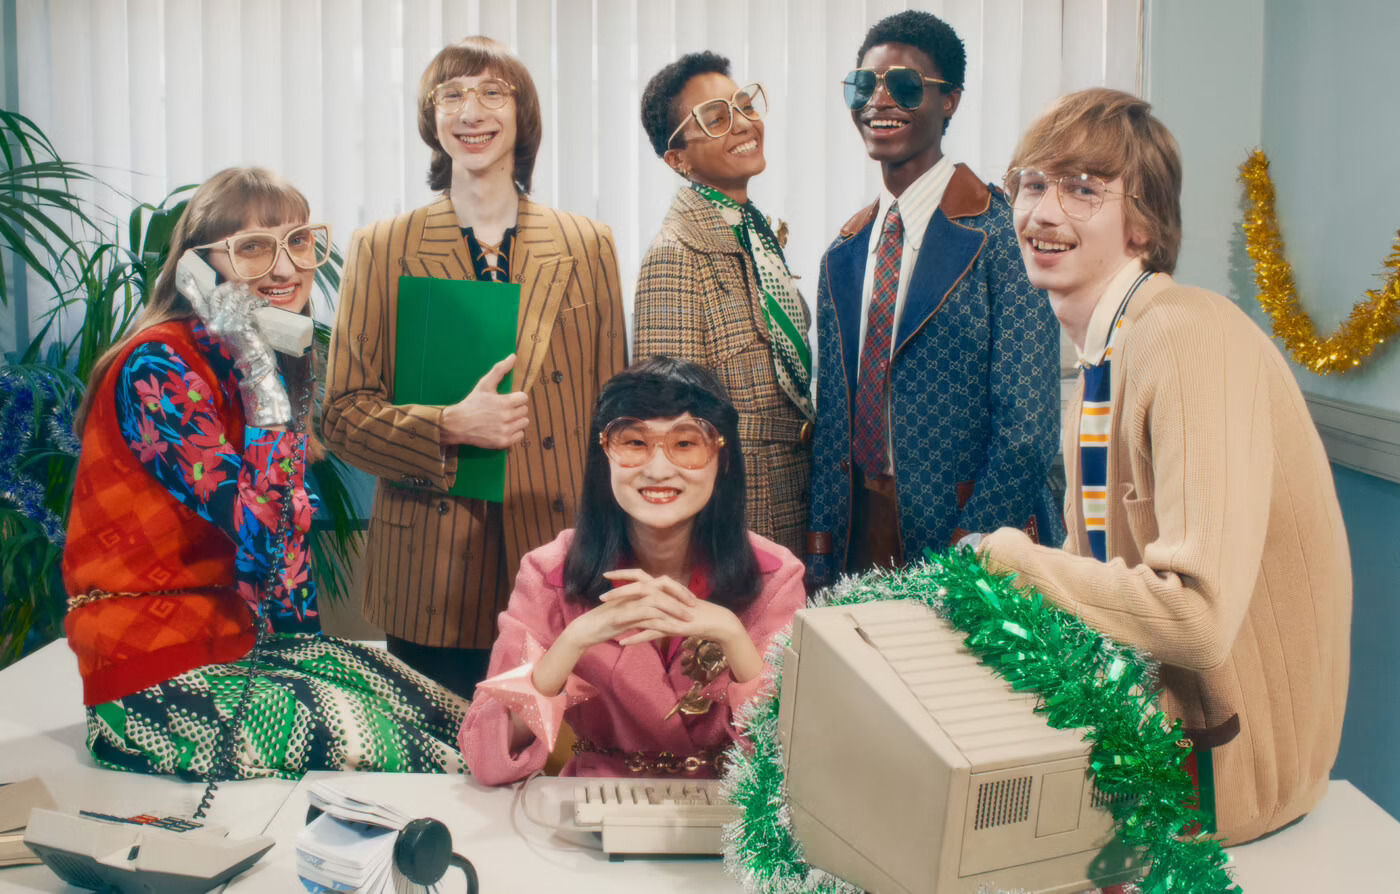 GUCCI’s 2020 Christmas ad campaign about an office party